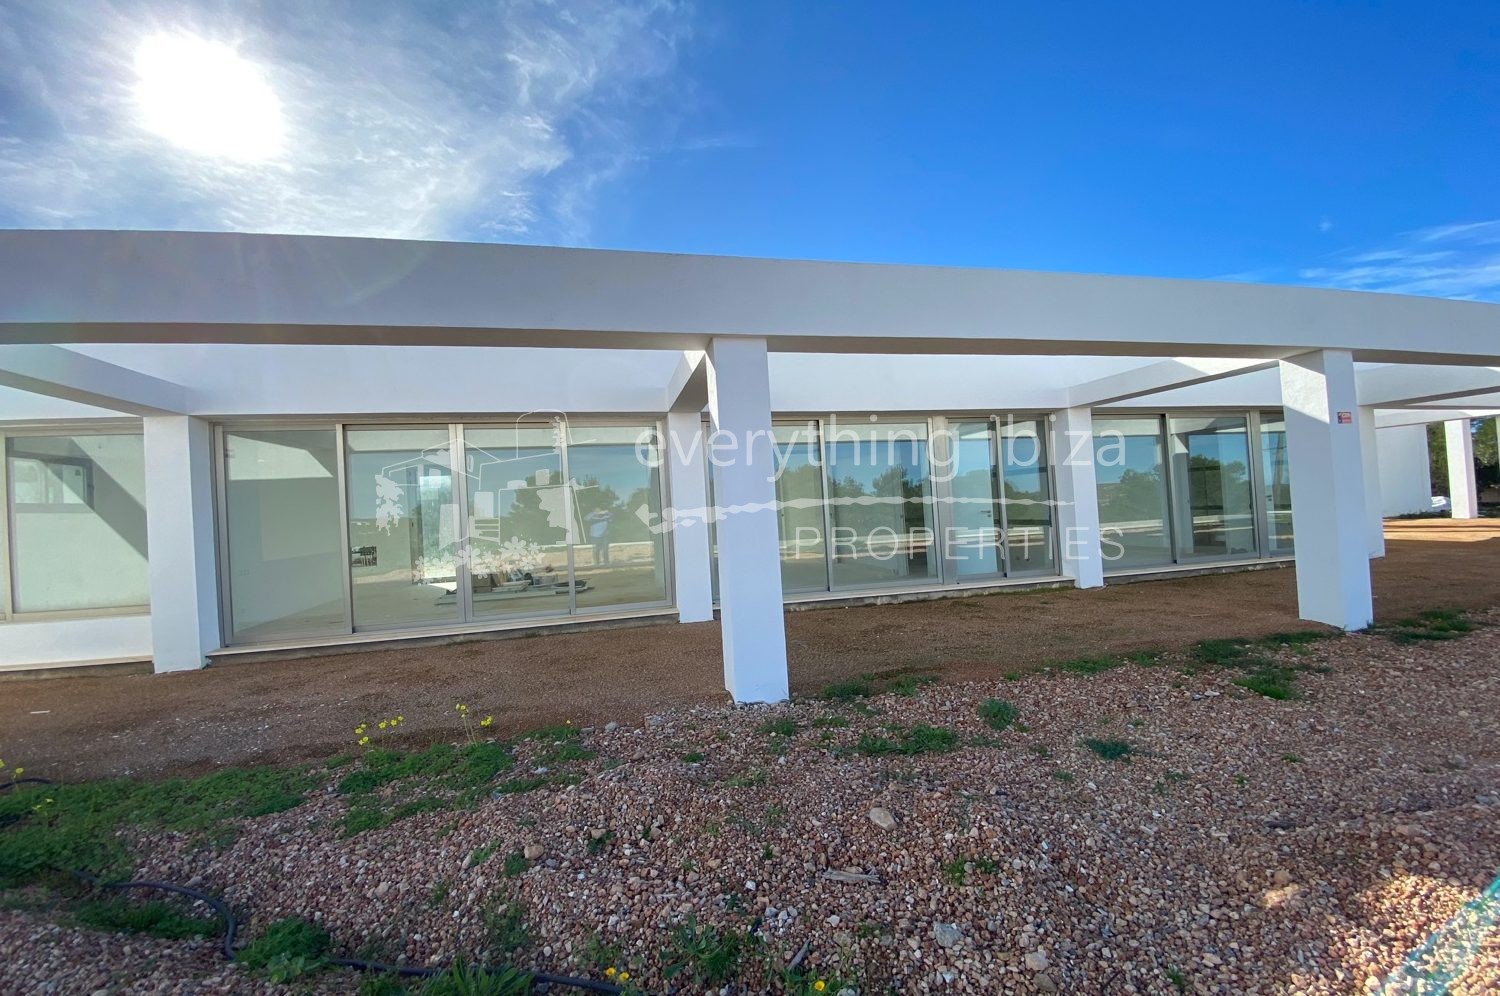 ref 994 - Project property for sale in Ibiza by everything ibiza Properties